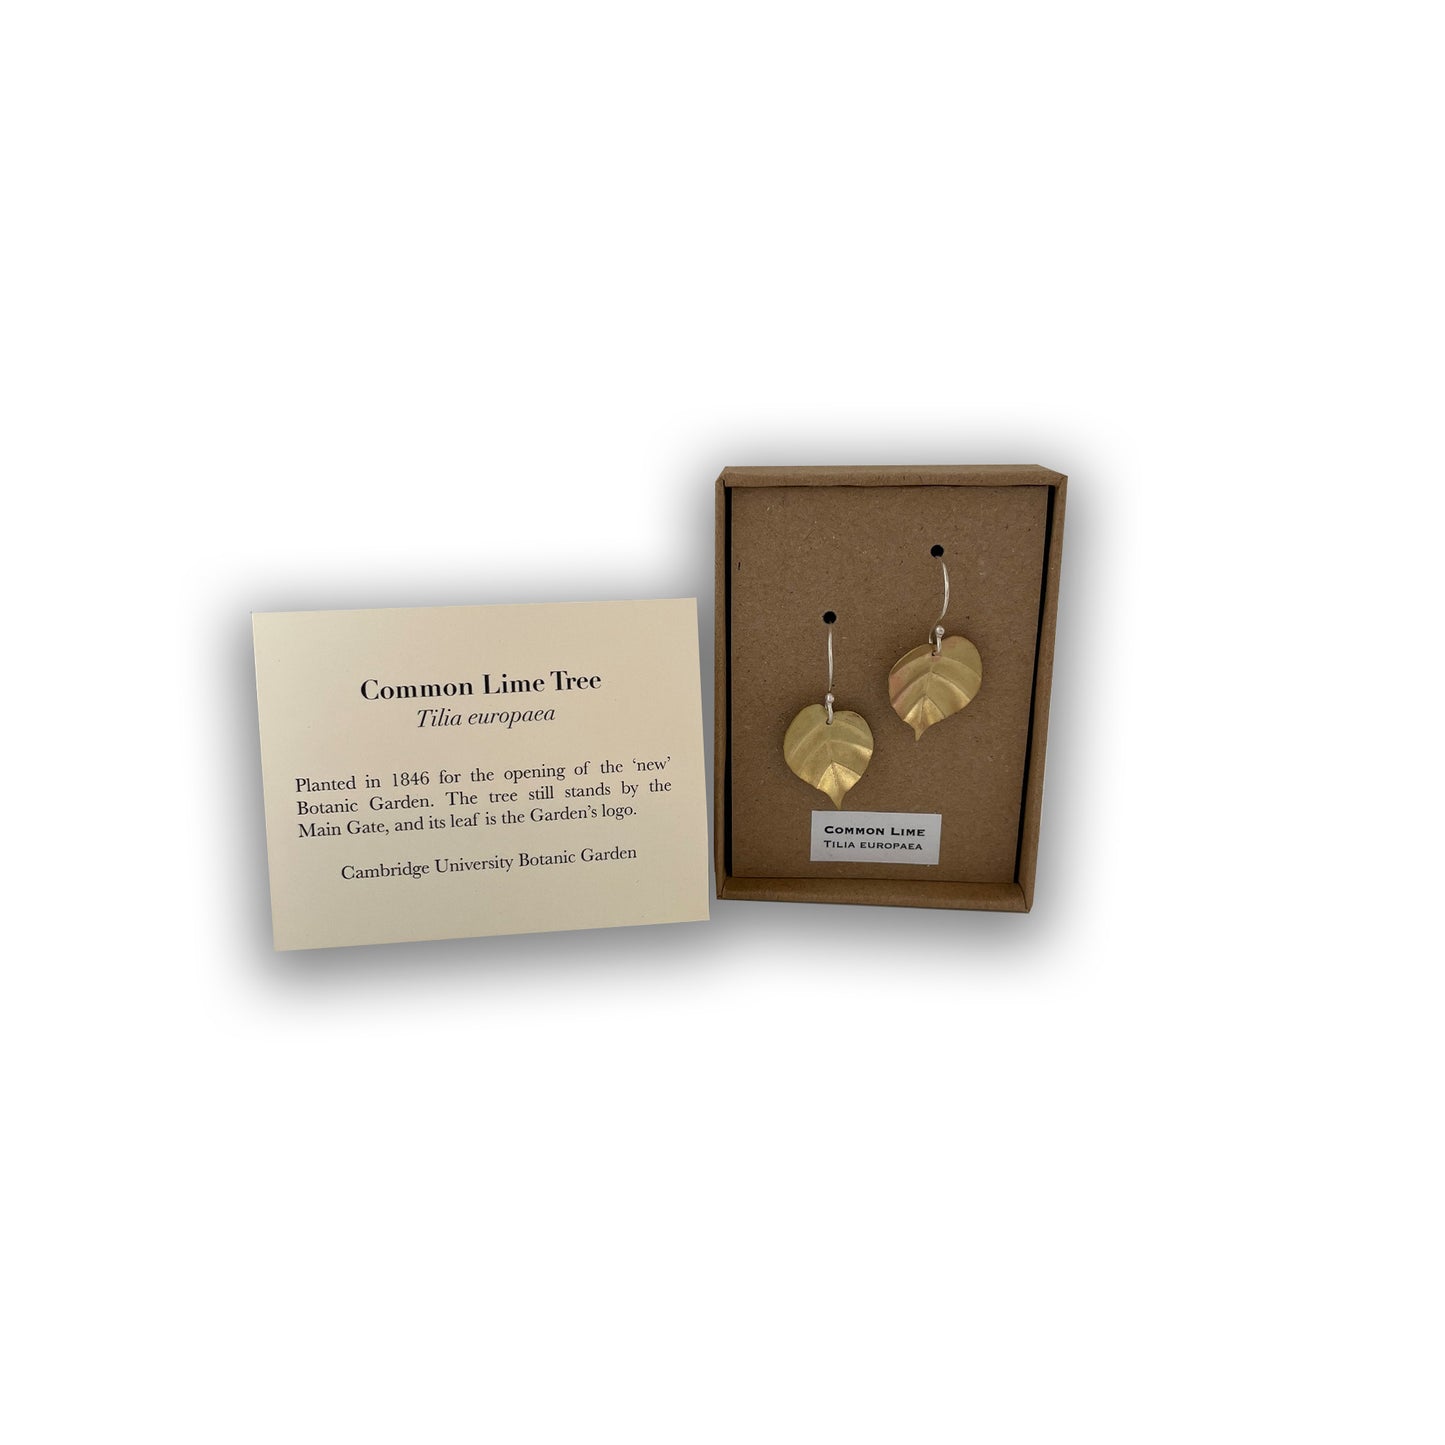 Lime tree leaf earrings in box and information card. 